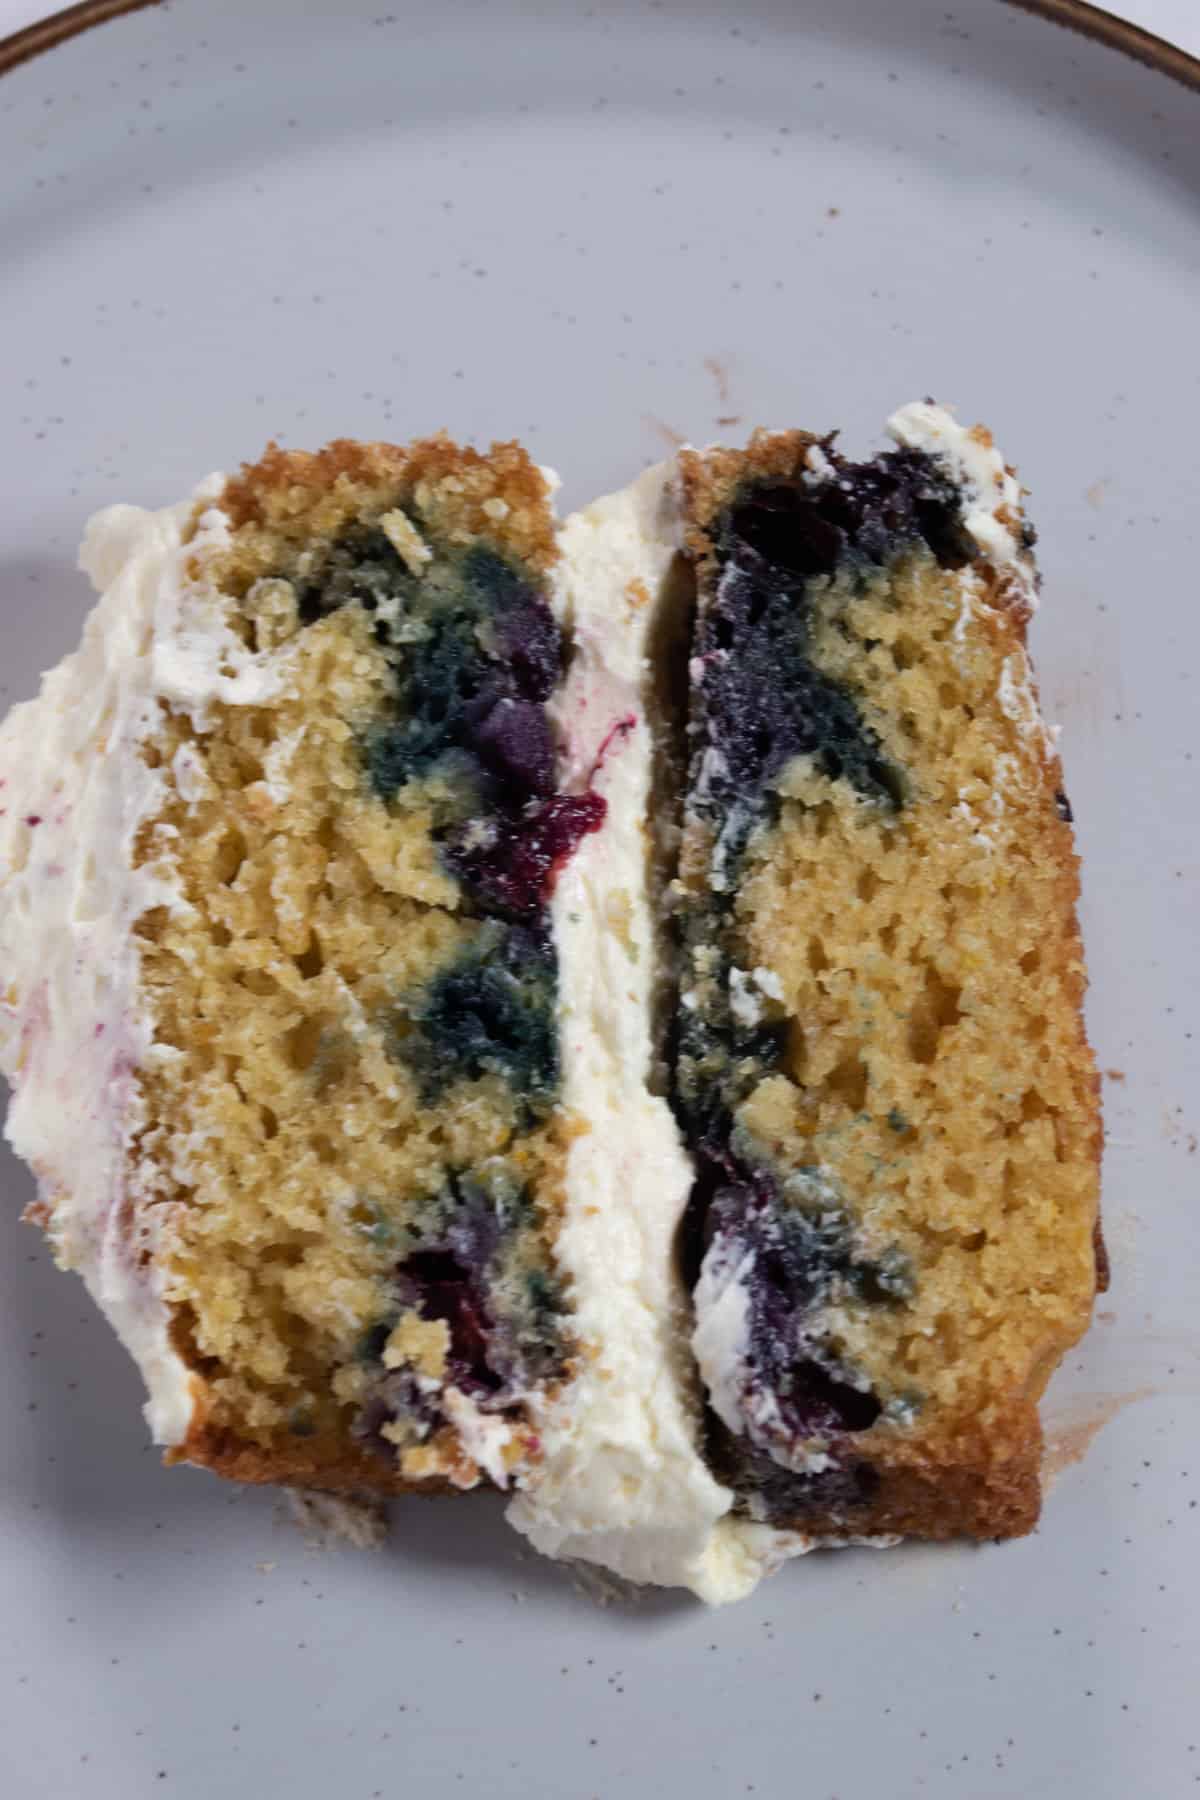 A large chunky slice of my orange blueberry cake on a white plate.